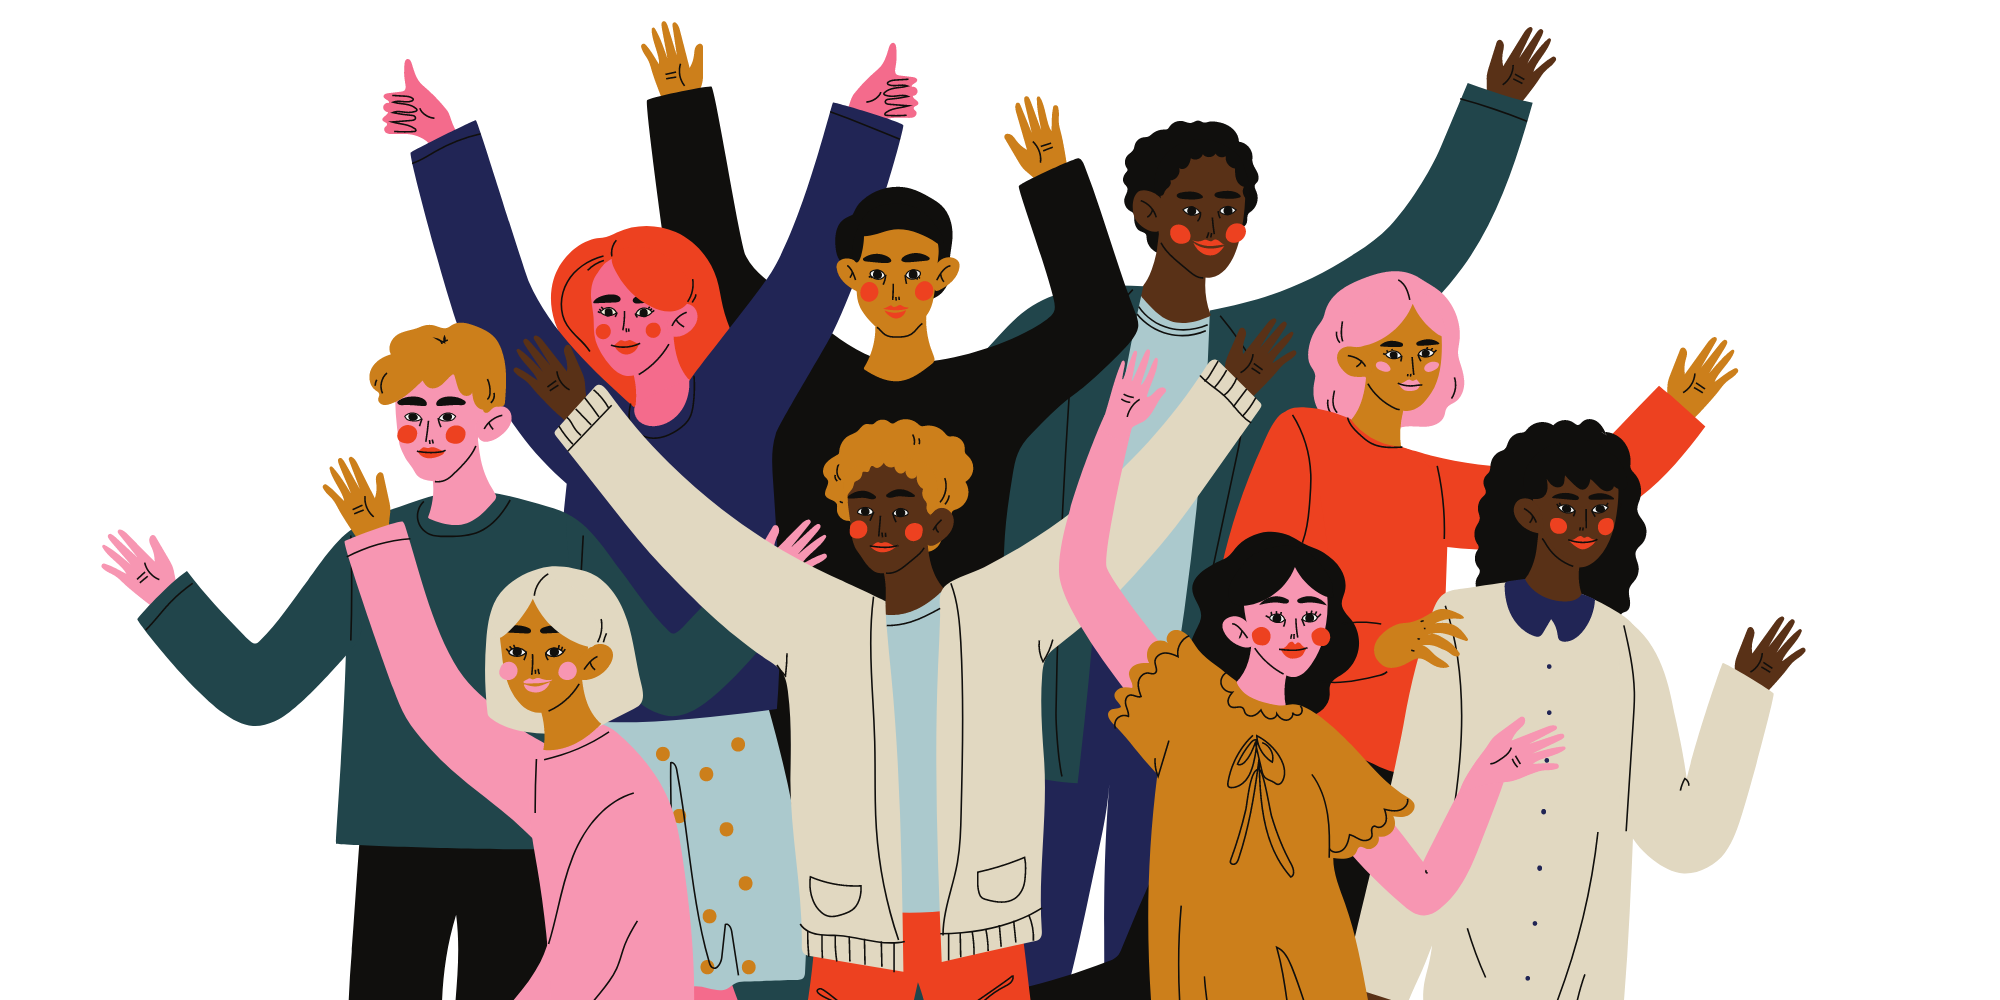 Graphic diversity image - 9 diverse happy people with hands up